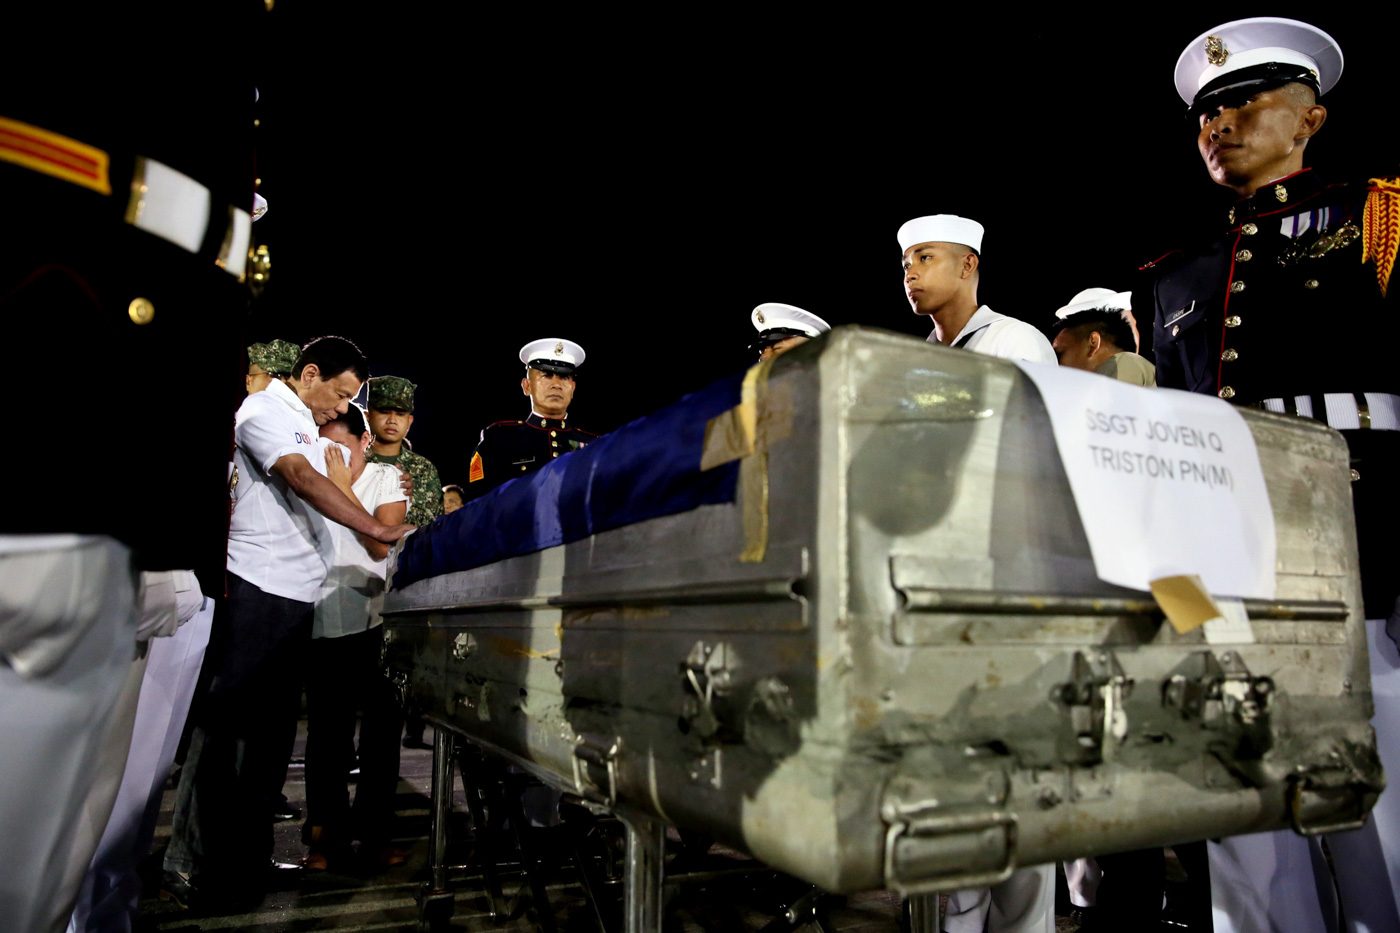 SYMPATHY. President Rodrigo Duterte condoles with bereaved families as he honors the Philippine Marines killed in anti-terror operations in Marawi City during the transfer of the soldiers' remains in Villamor Air Base in Pasay City on June 11, 2017. Malacañang Photo   